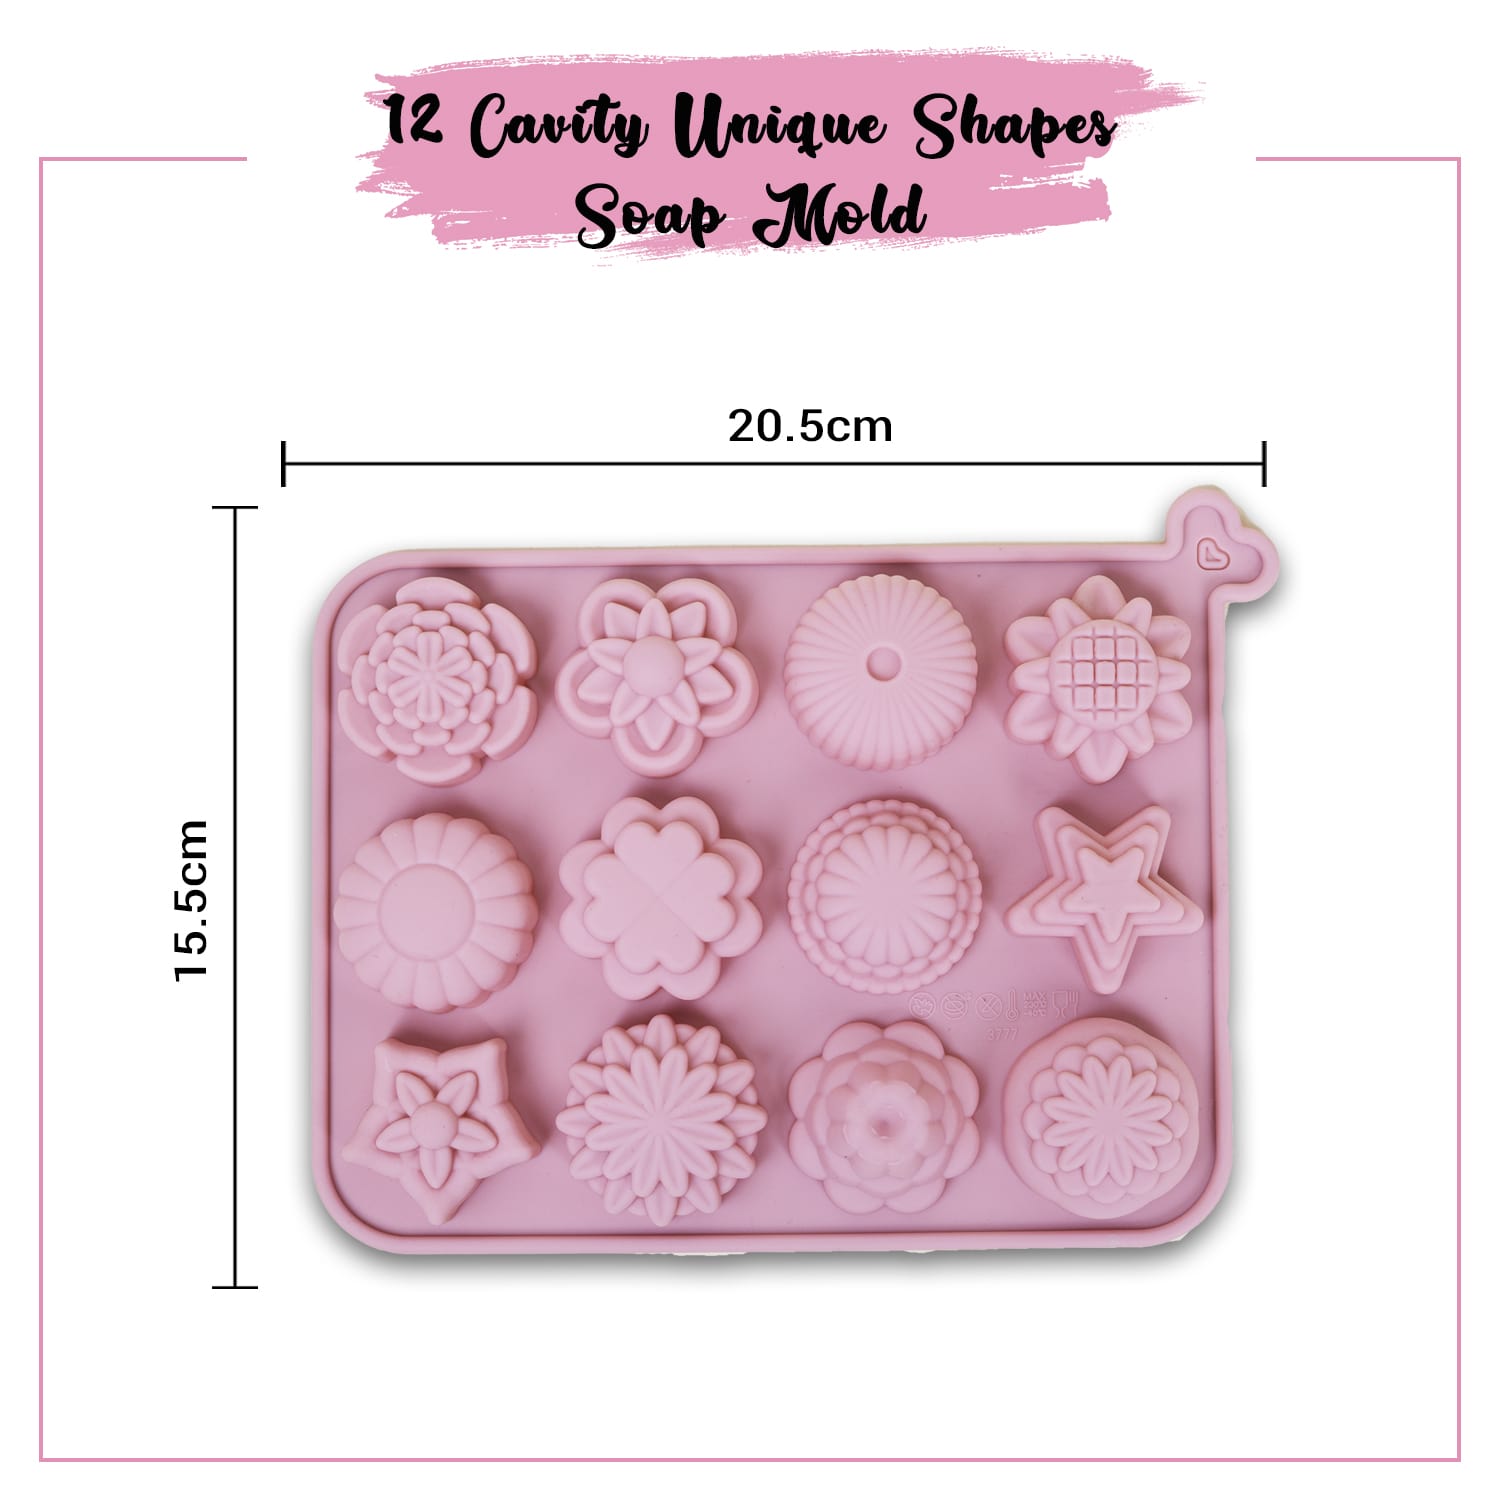 Buy 12 Cavity Multi Shape Silicone Soap Mold Online – VedaOils